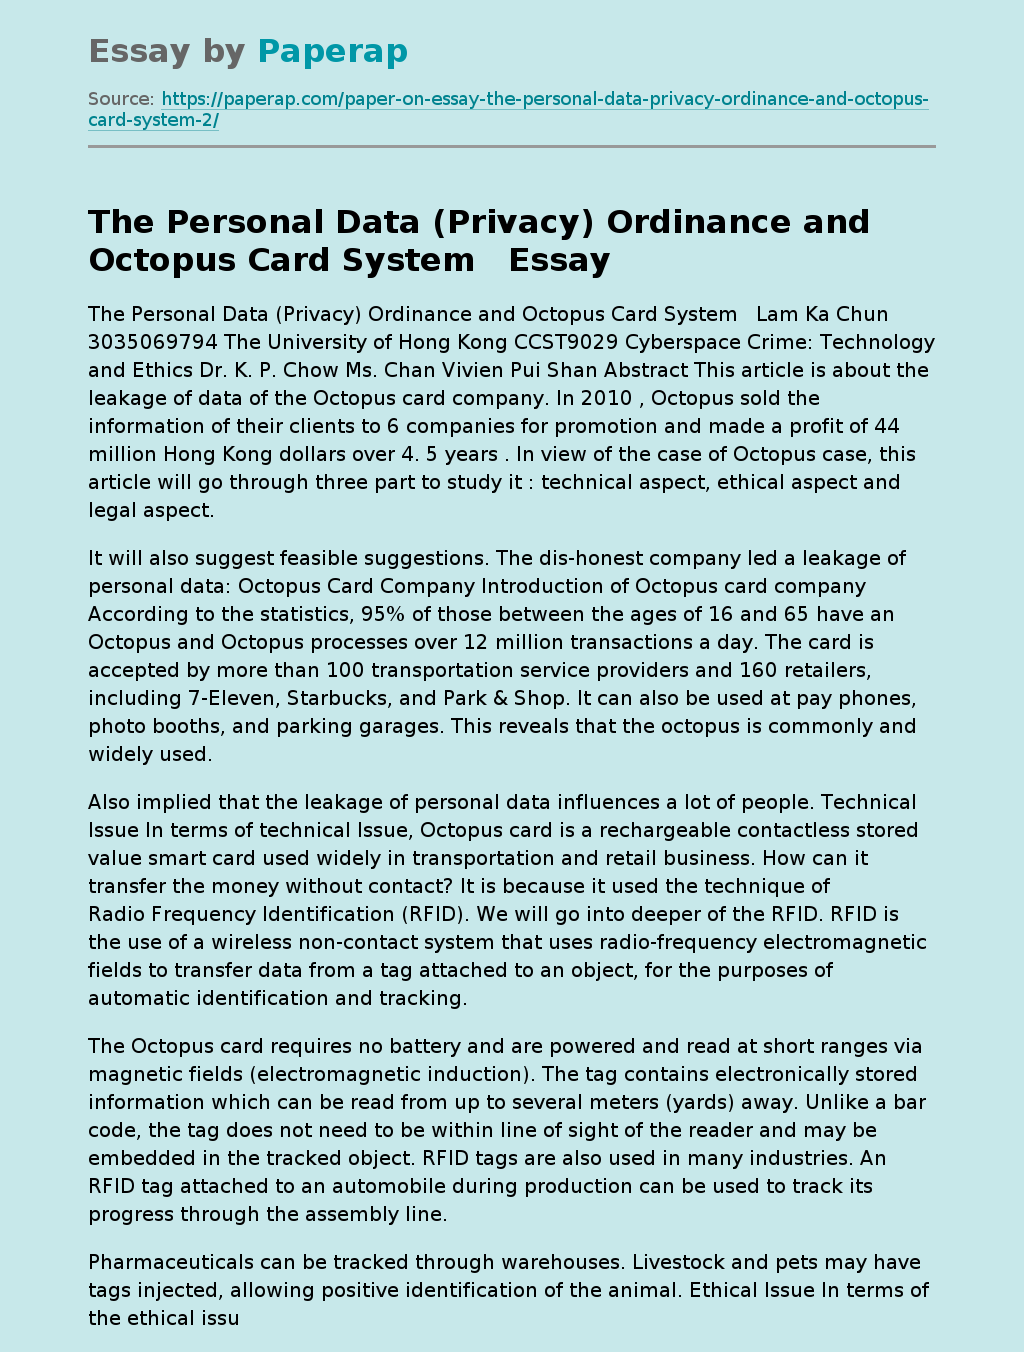 The Personal Data (Privacy) Ordinance and Octopus Card System  